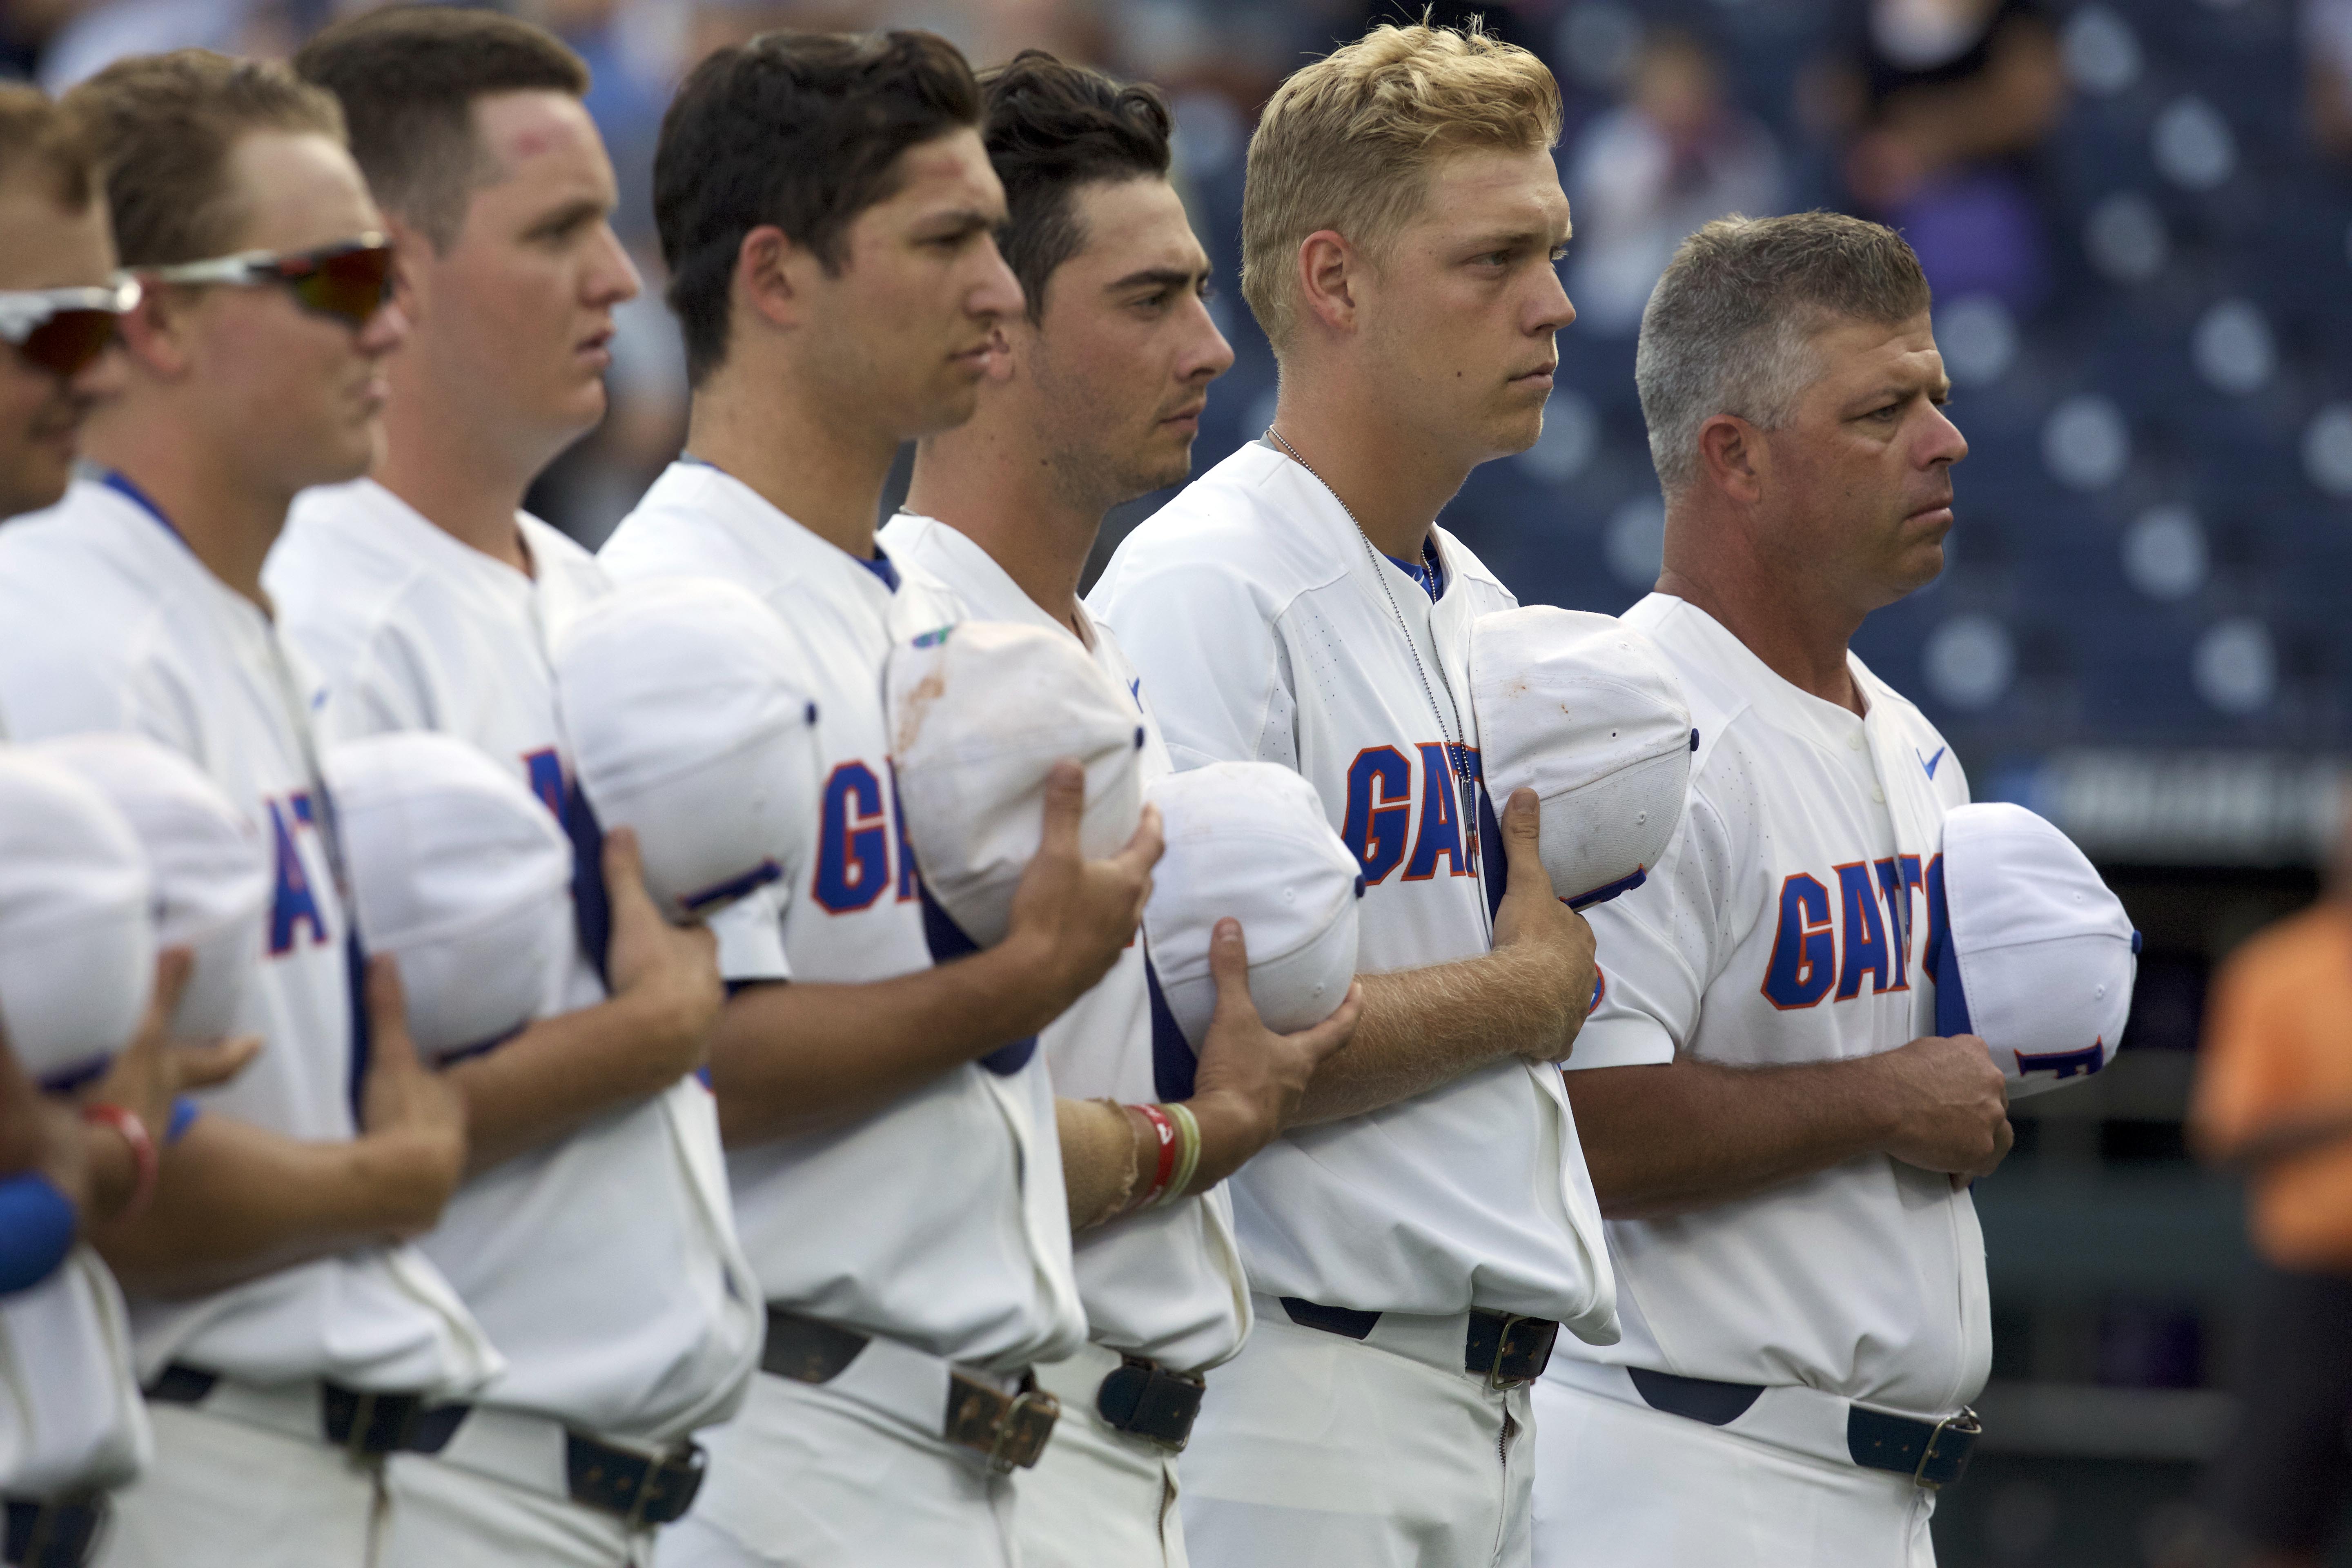 Game Preview: Florida baseball to host Stetson Hatters for midweek matchup